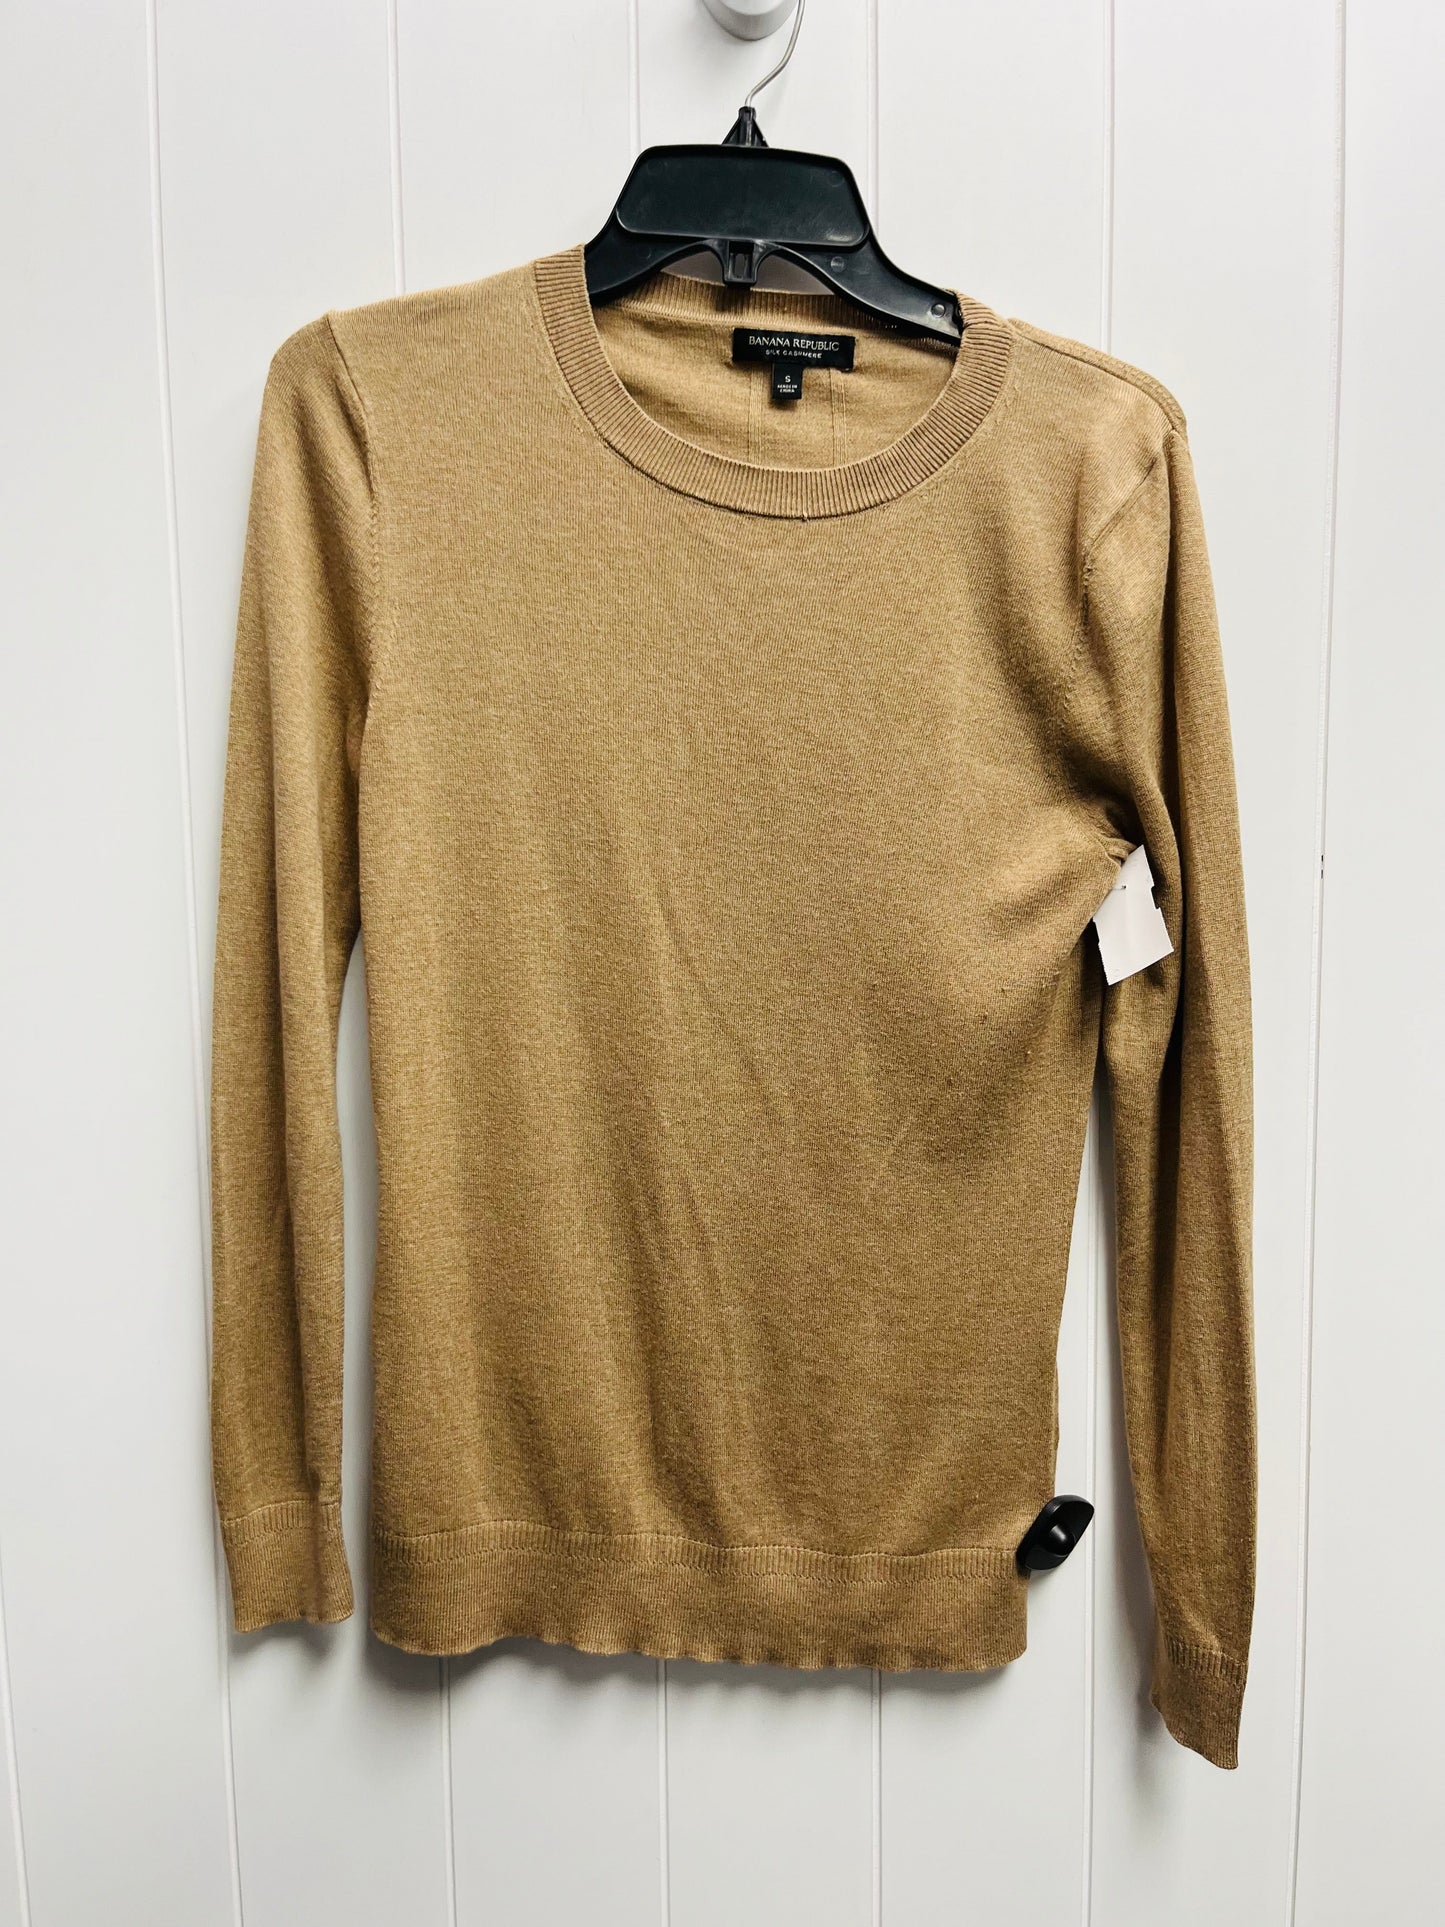 Brown Sweater Cashmere Banana Republic, Size S